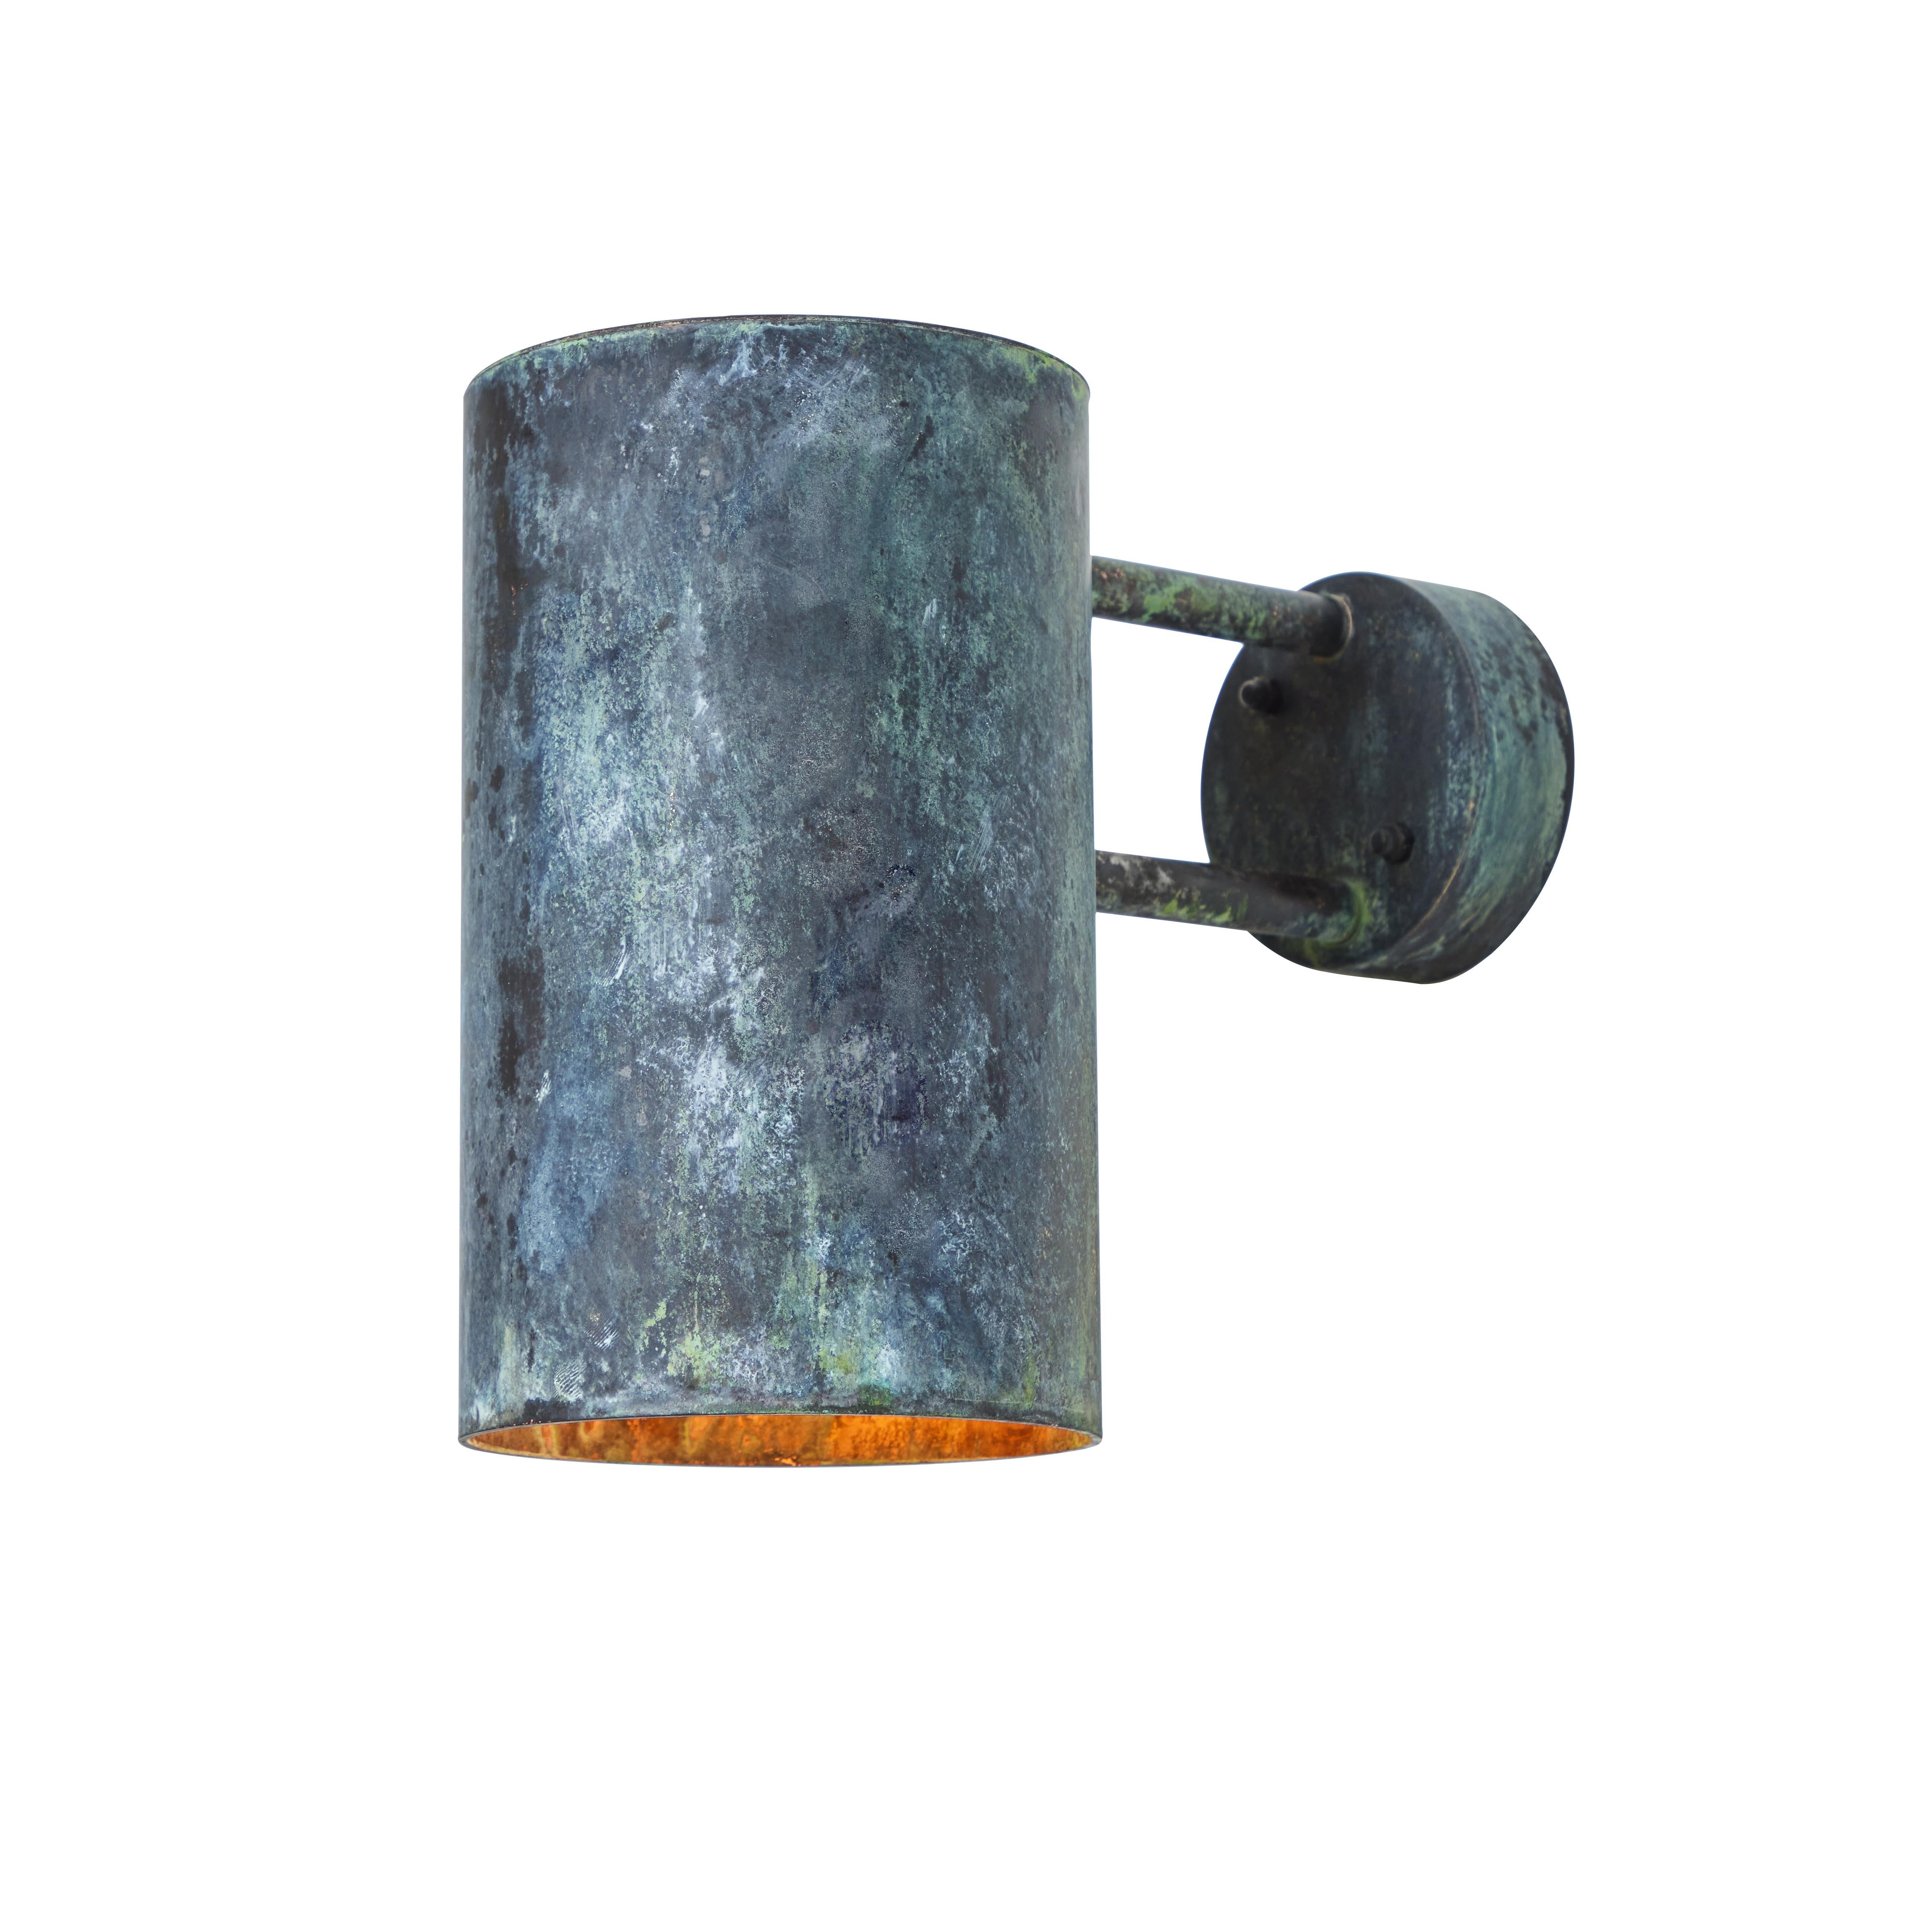 Large Hans-Agne Jakobsson C 627 'Rulle' Darkly Patinated Outdoor Sconce For Sale 3